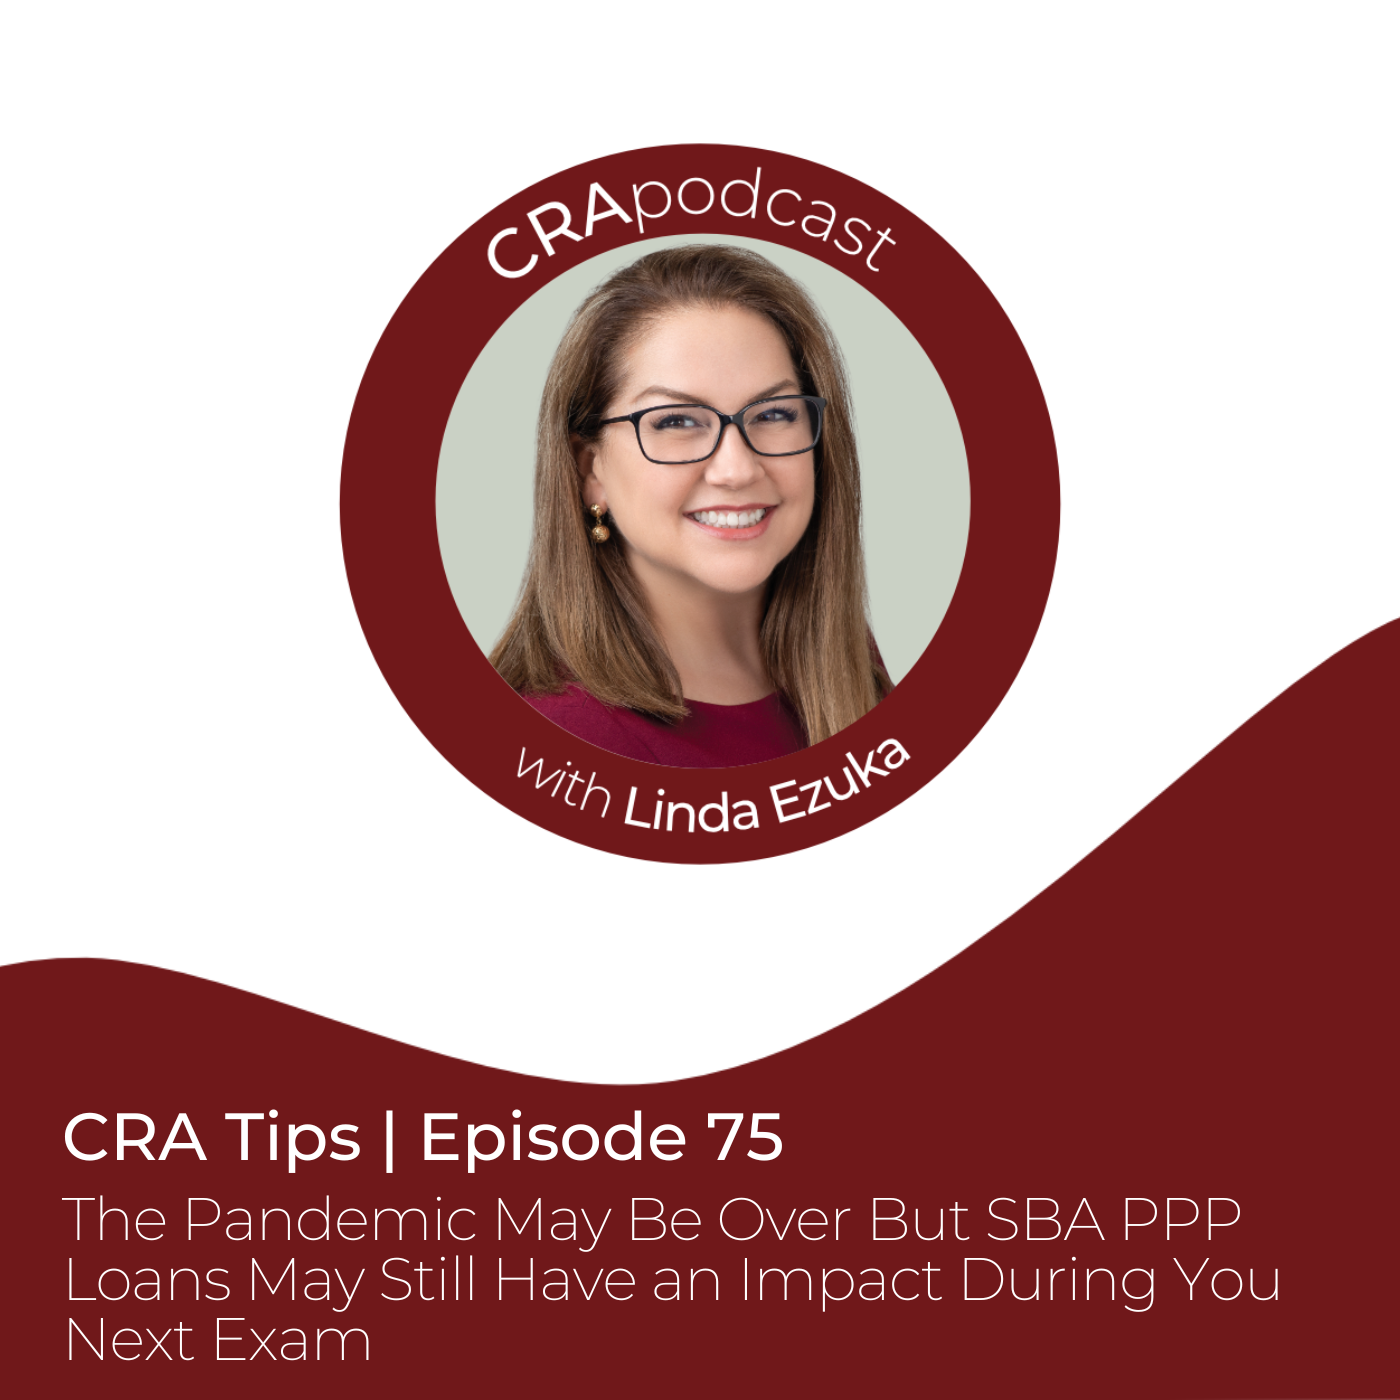 Episode 75: CRA Tip: The Pandemic May Be Over but SBA PPP Loans May Still Have an Impact During Your Next Exam